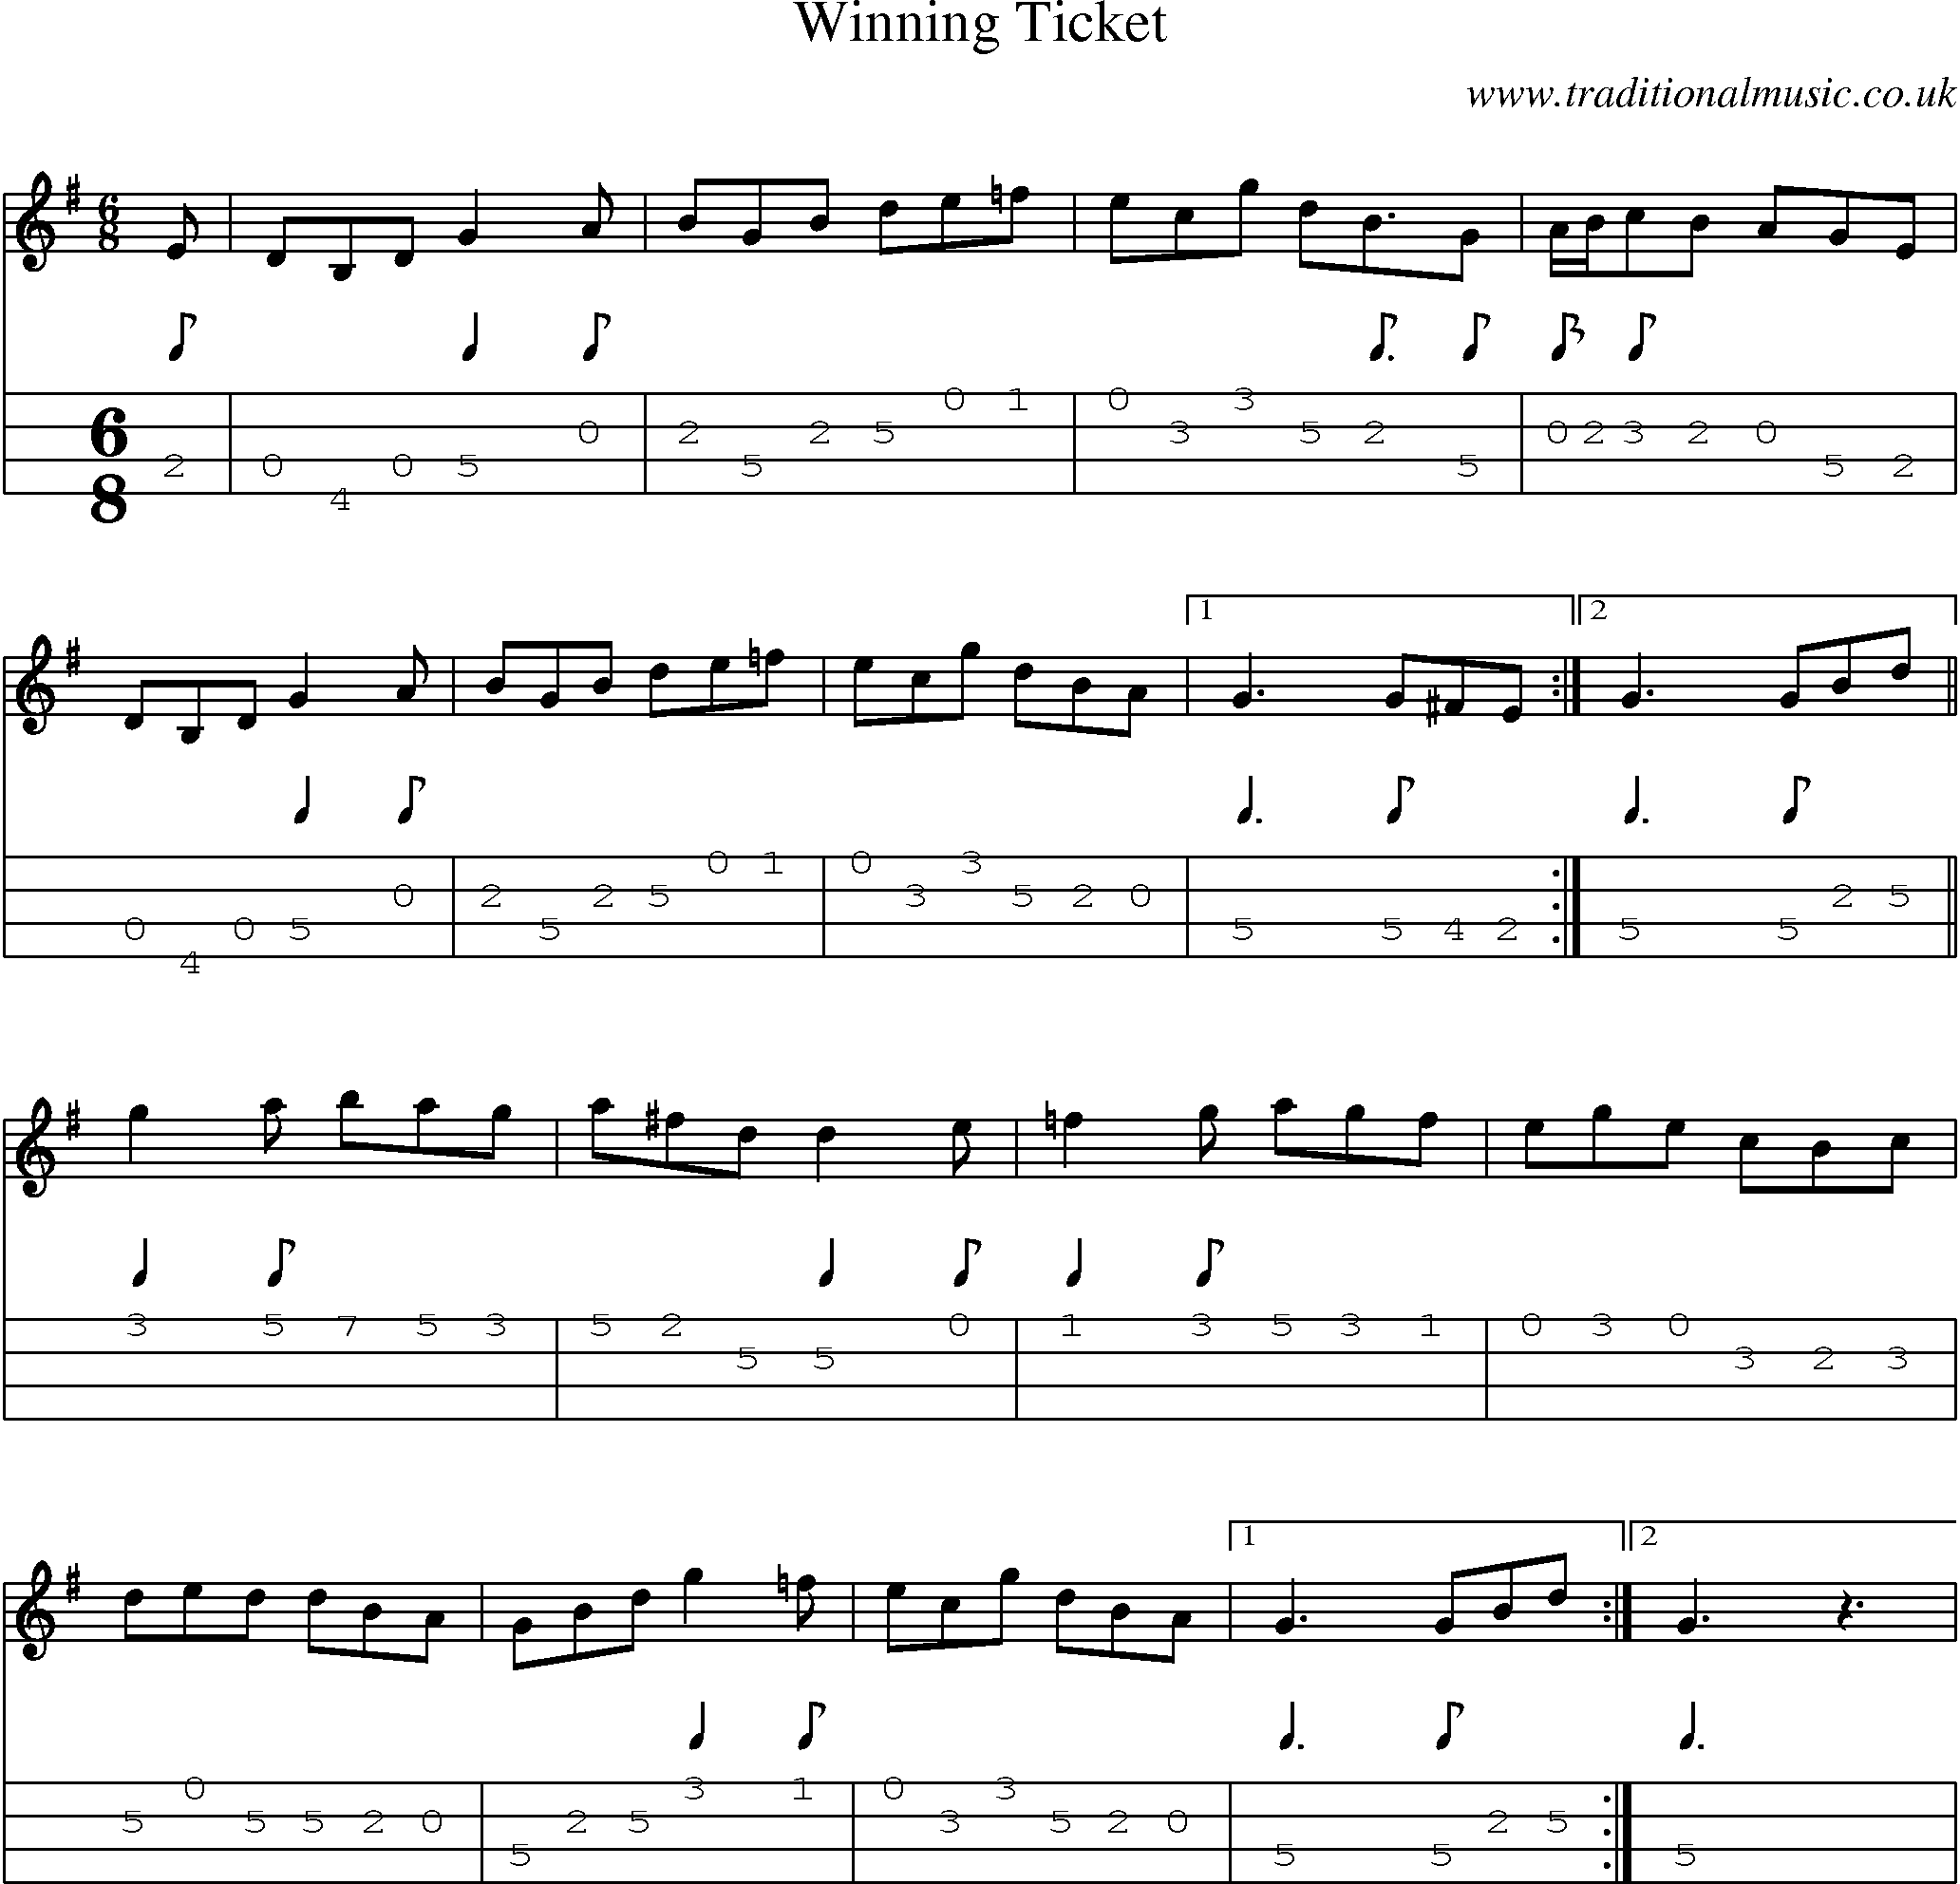 Music Score and Mandolin Tabs for Winning Ticket